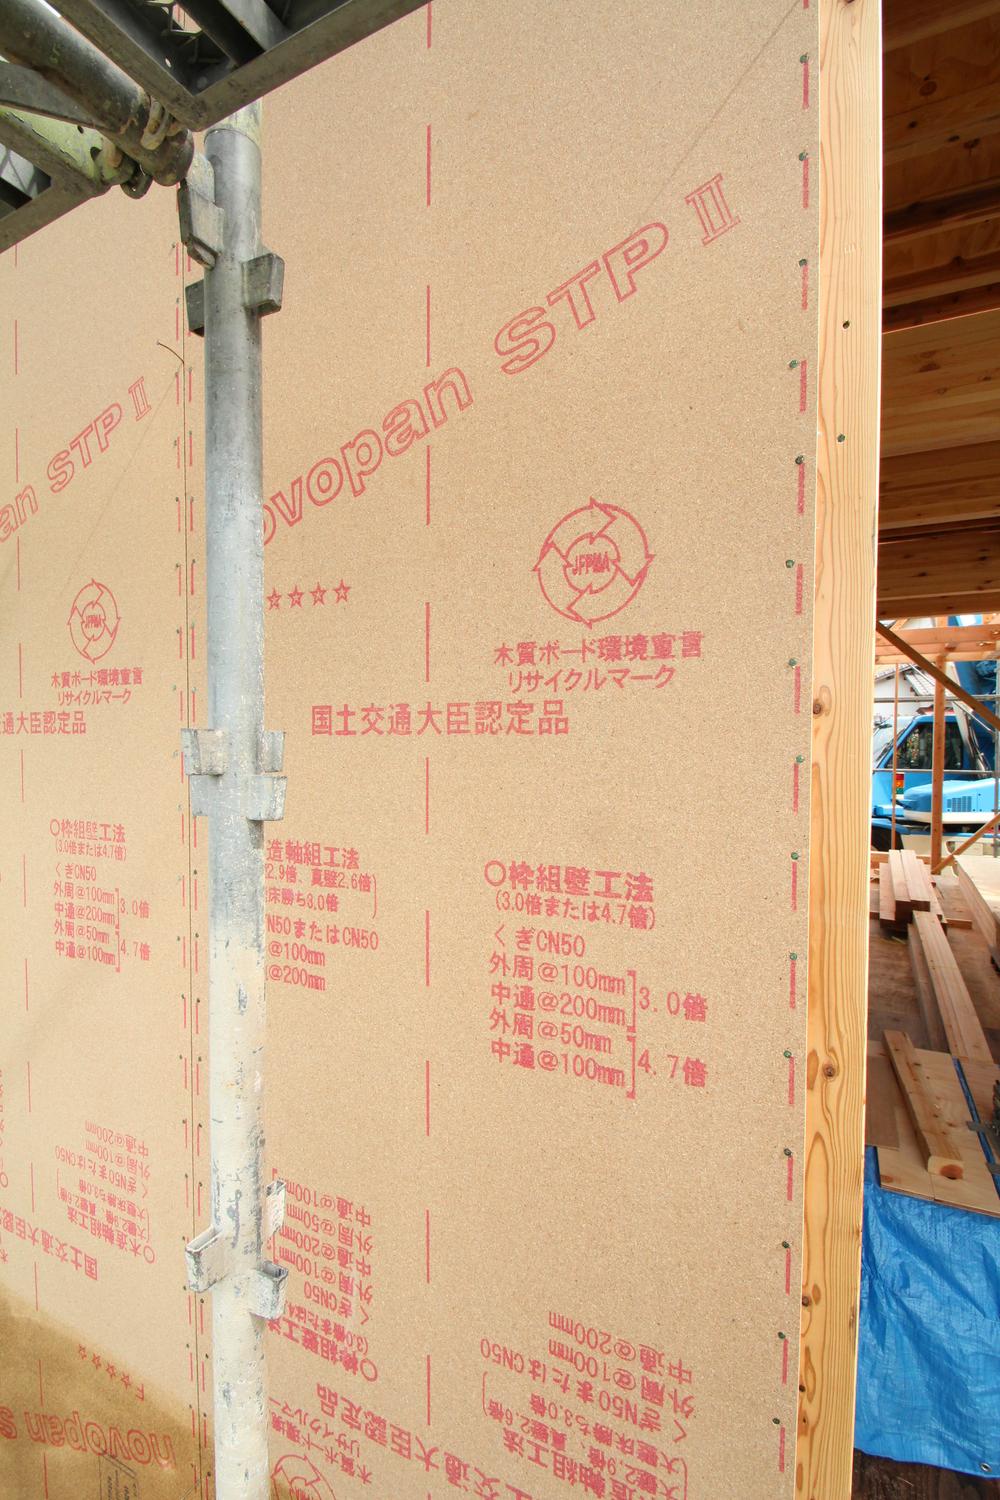 Construction ・ Construction method ・ specification. Earthquake in the seismic plywood ・ Strongly by wind pressure Sound insulation ・ Well as improvement of airtightness